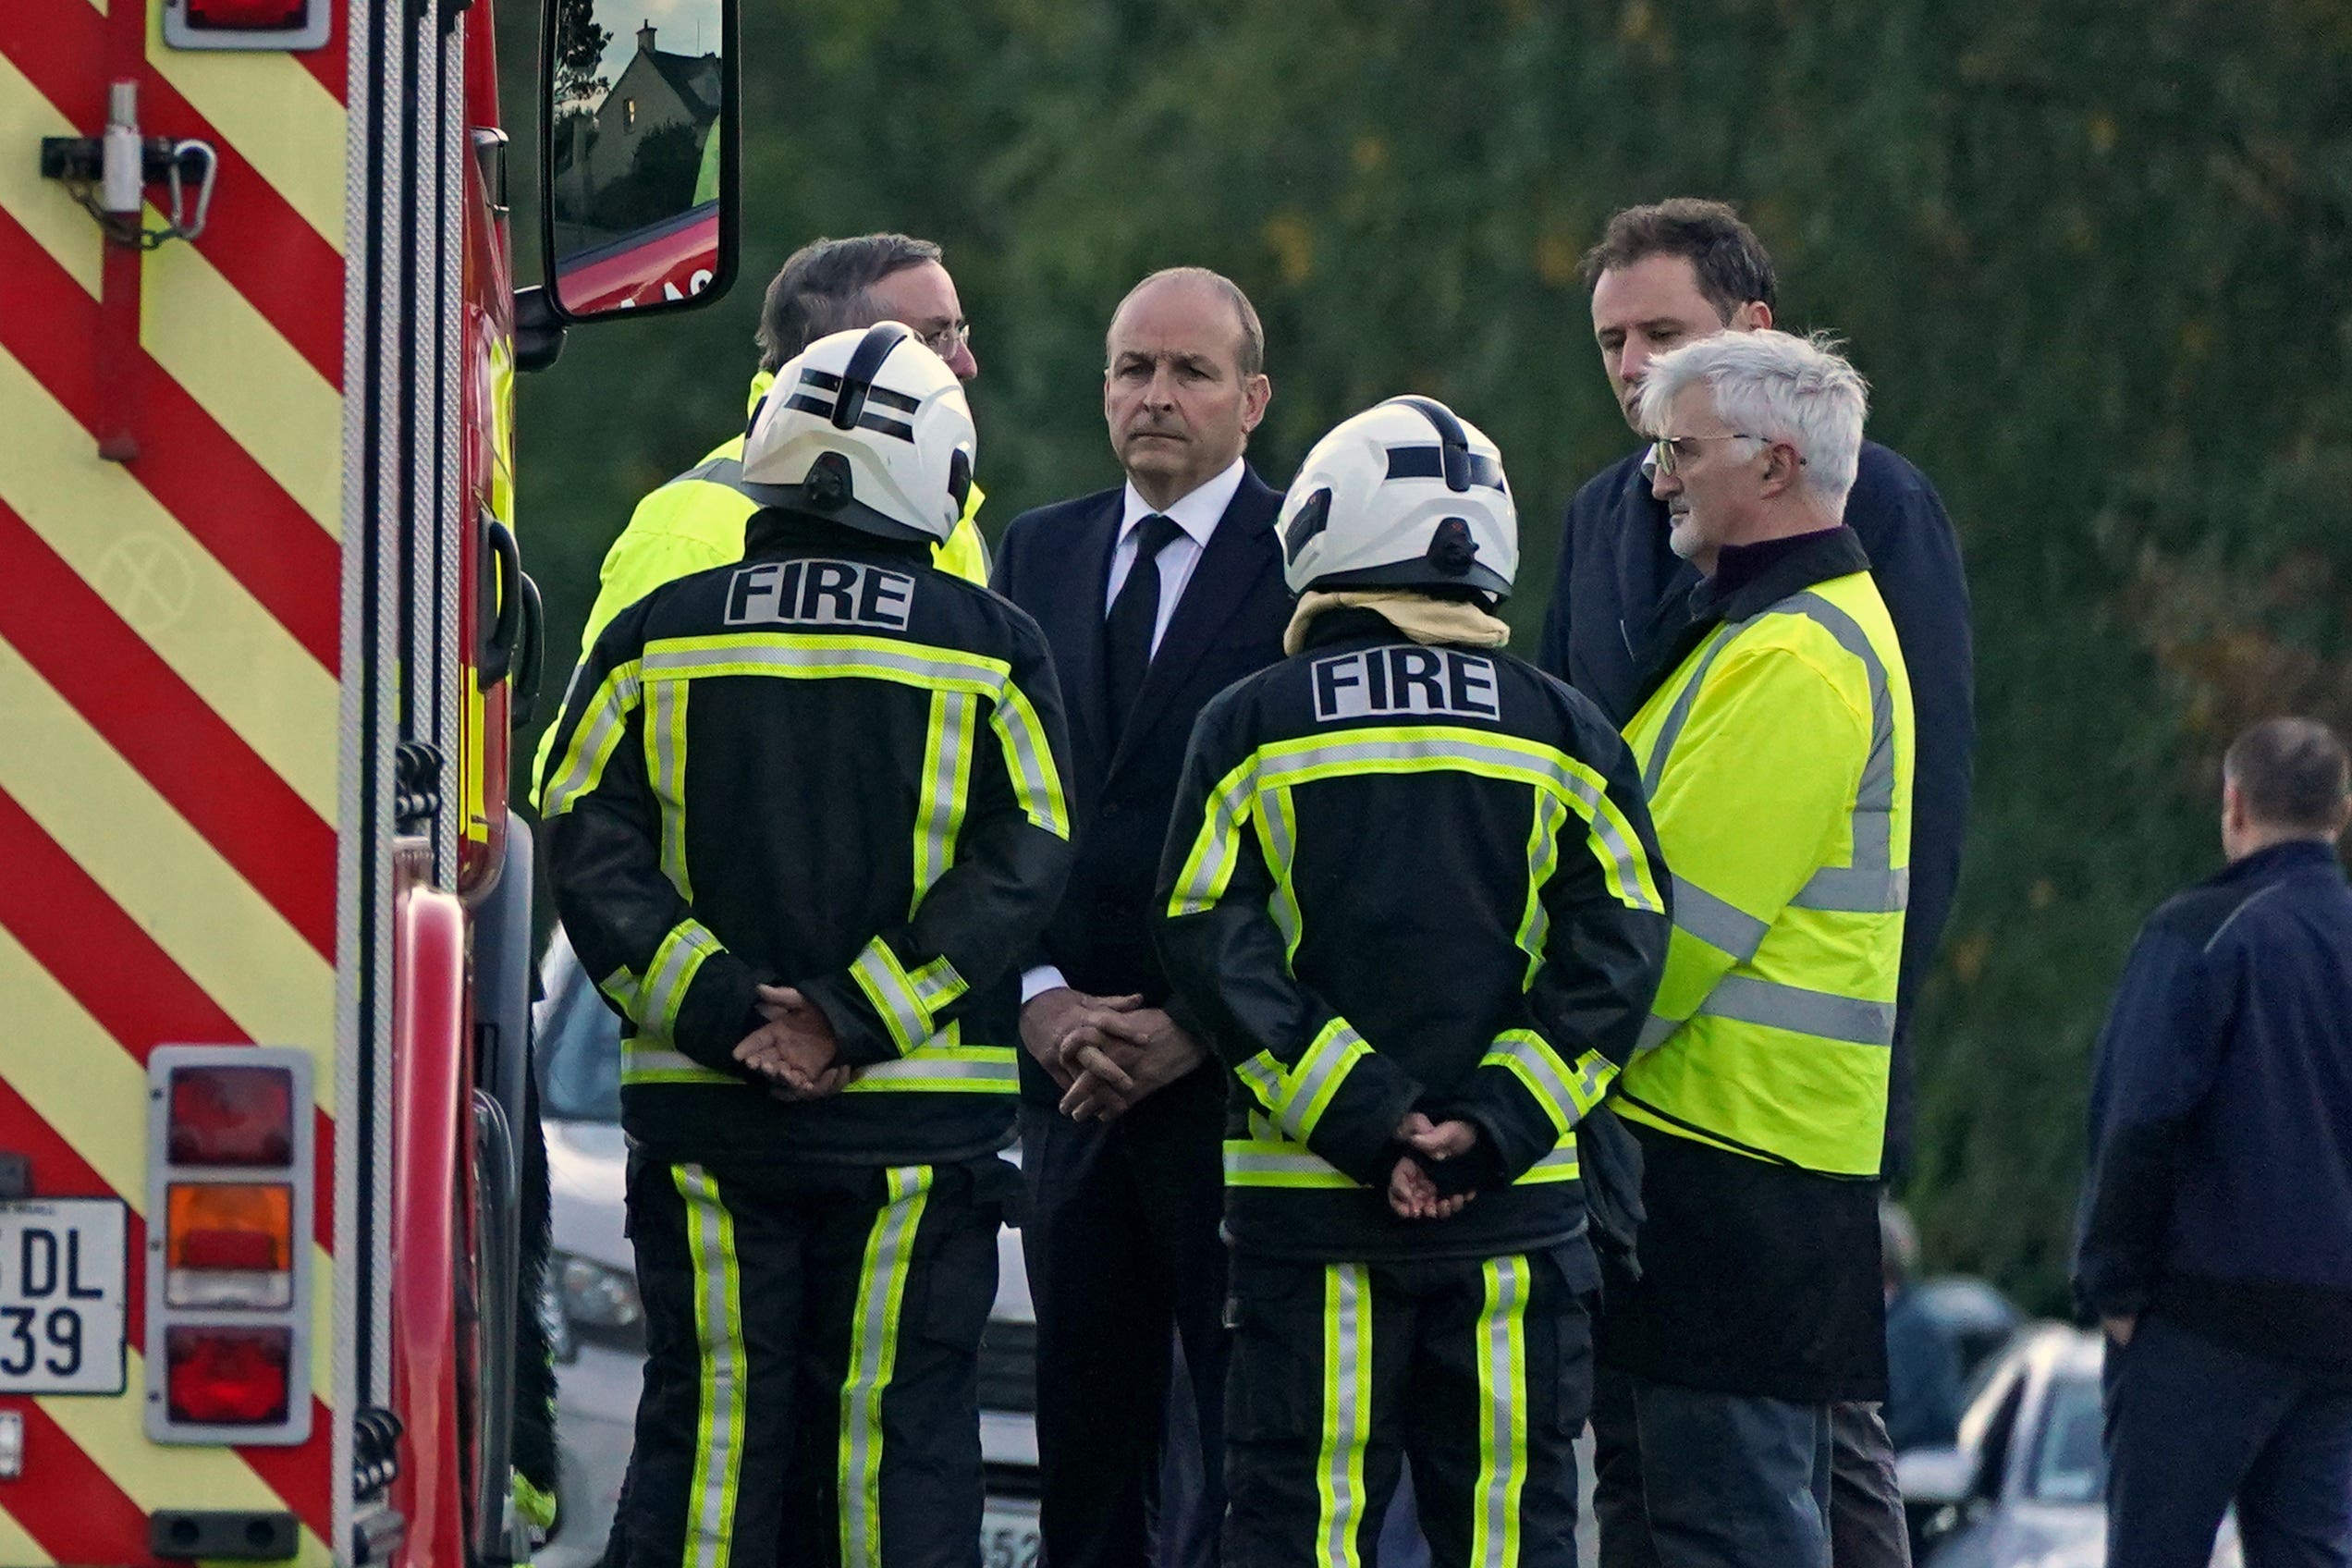 Taoiseach Micheal Martin (centre) speaks with members of the fire service at the scene of an explosion at Applegreen service station in the village of Creeslough in Co Donegal, where ten people have now been confirmed dead. Picture date: Saturday October 8, 2022.